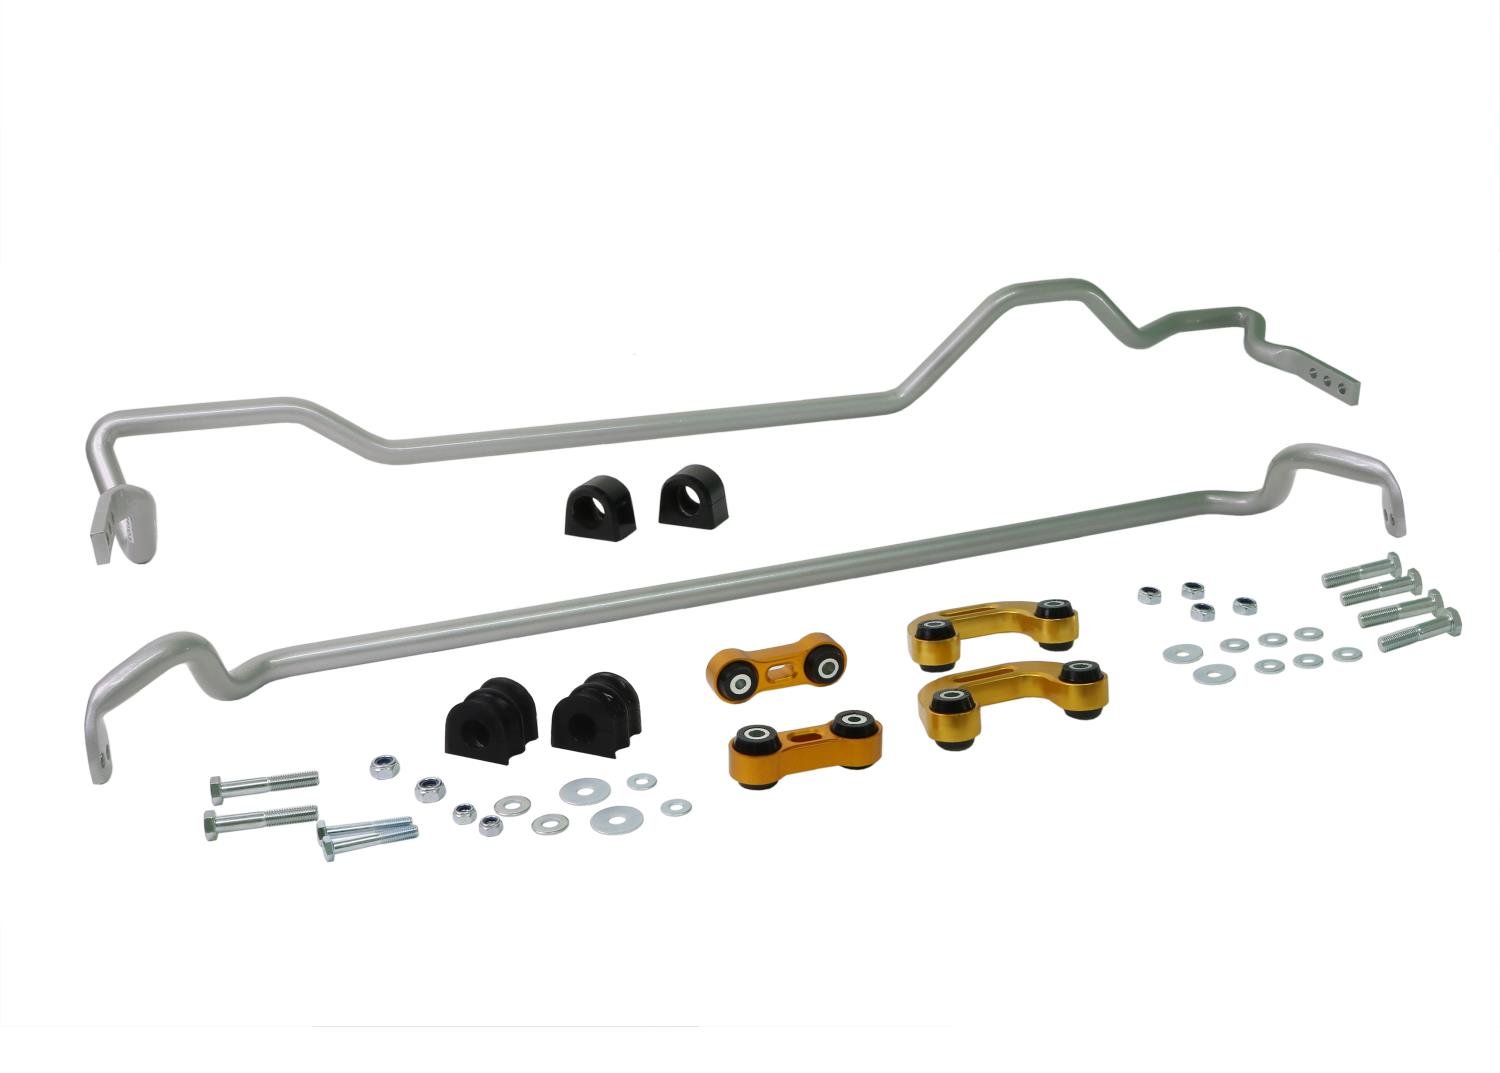 BSK006 Front and Rear Sway Bar Kit for